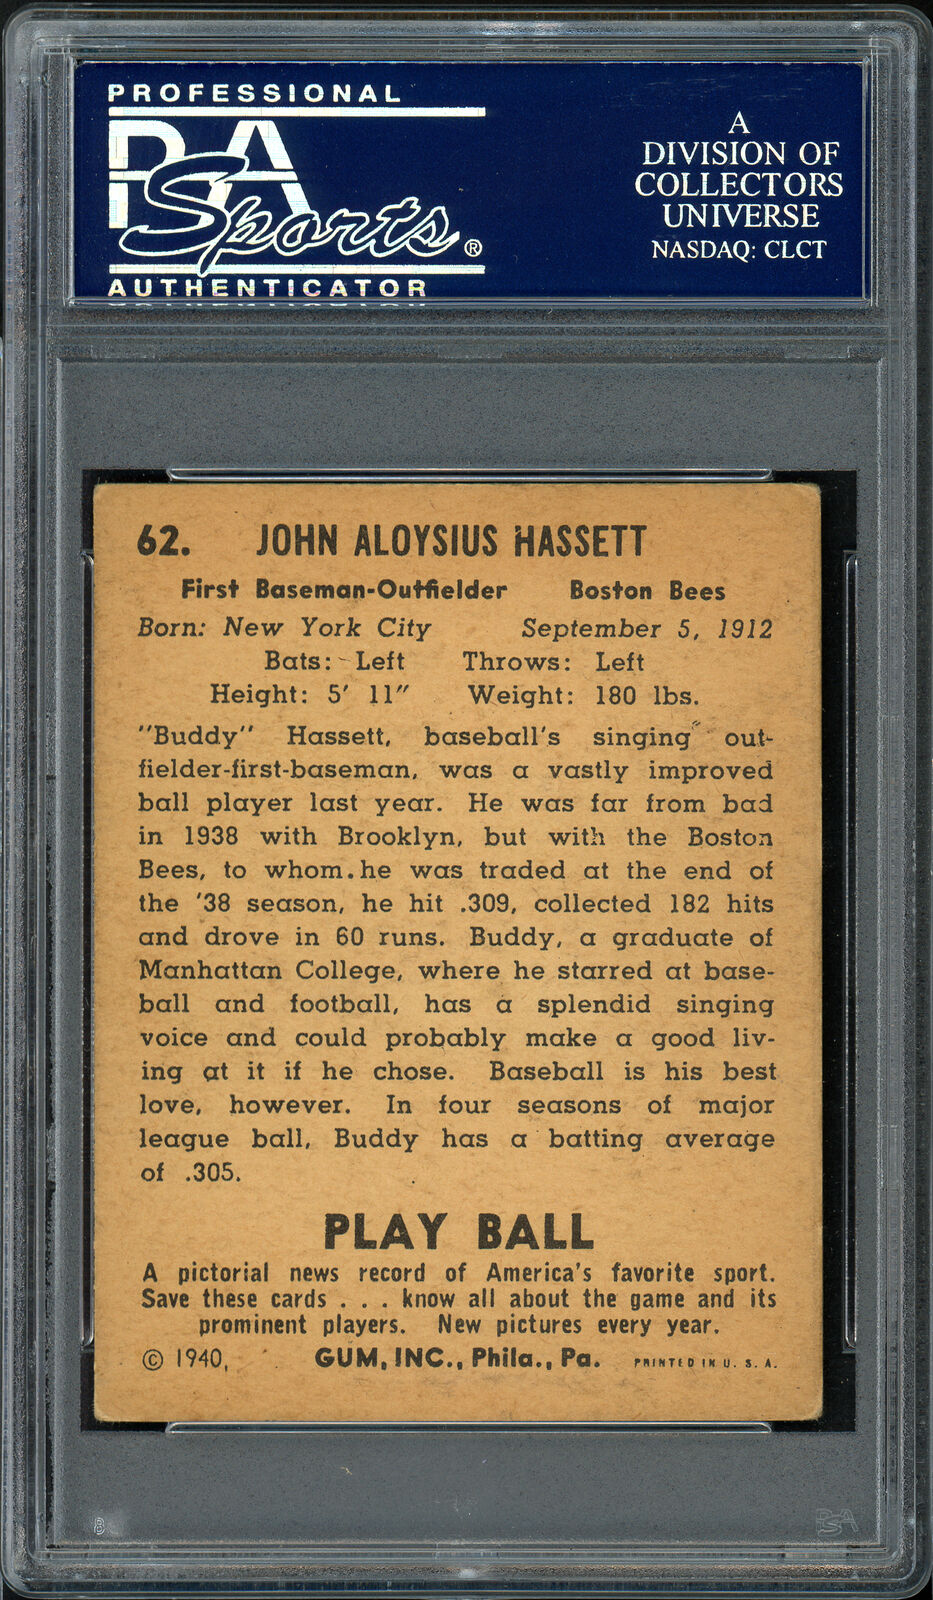 Buddy Hassett Autographed 1940 Play Ball Card #62 Boston Bees PSA/DNA 83986436 Image 3